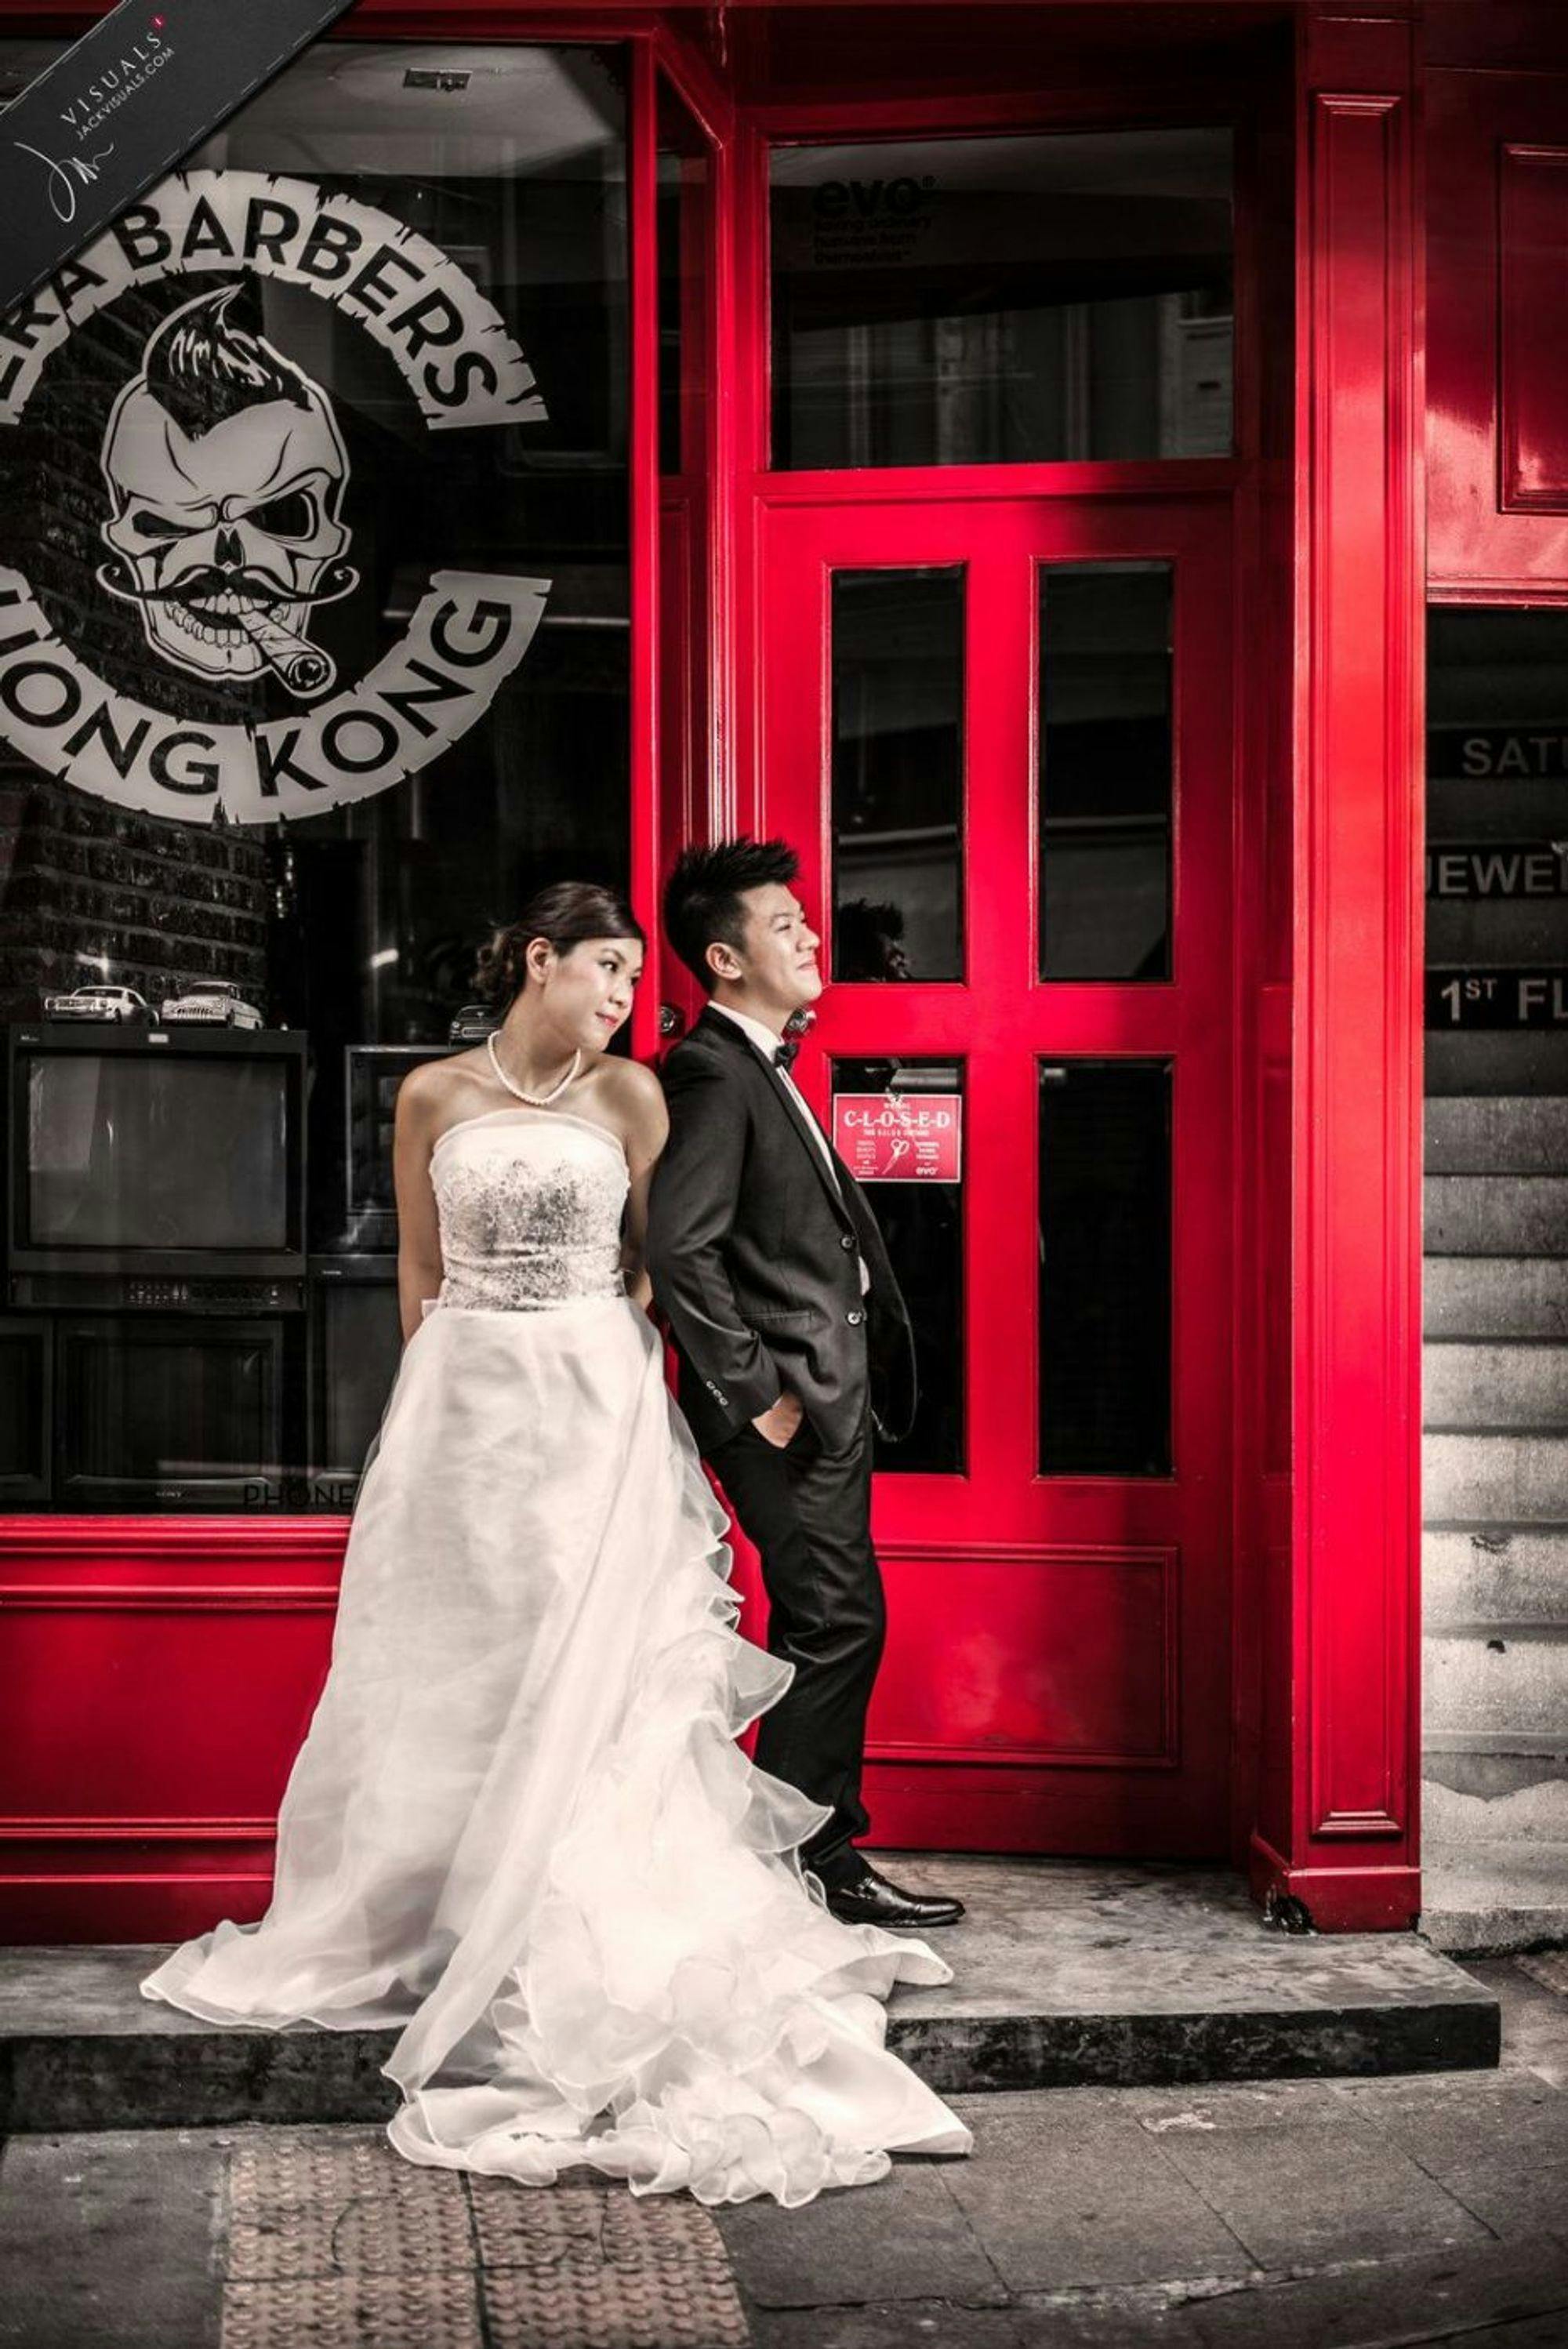 WEDDING PHOTOGRAPHY IN CENTRAL